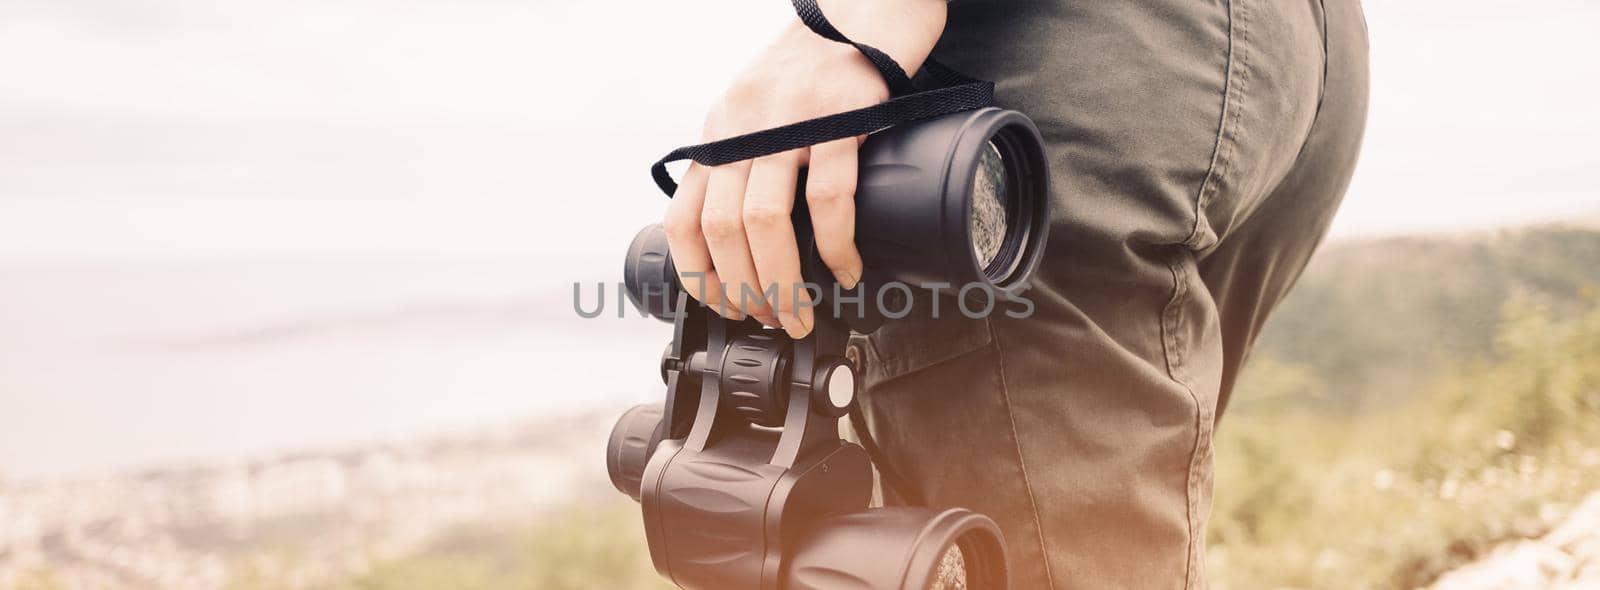 Unrecognizable woman standing with binoculars in summer mountains, close-up.